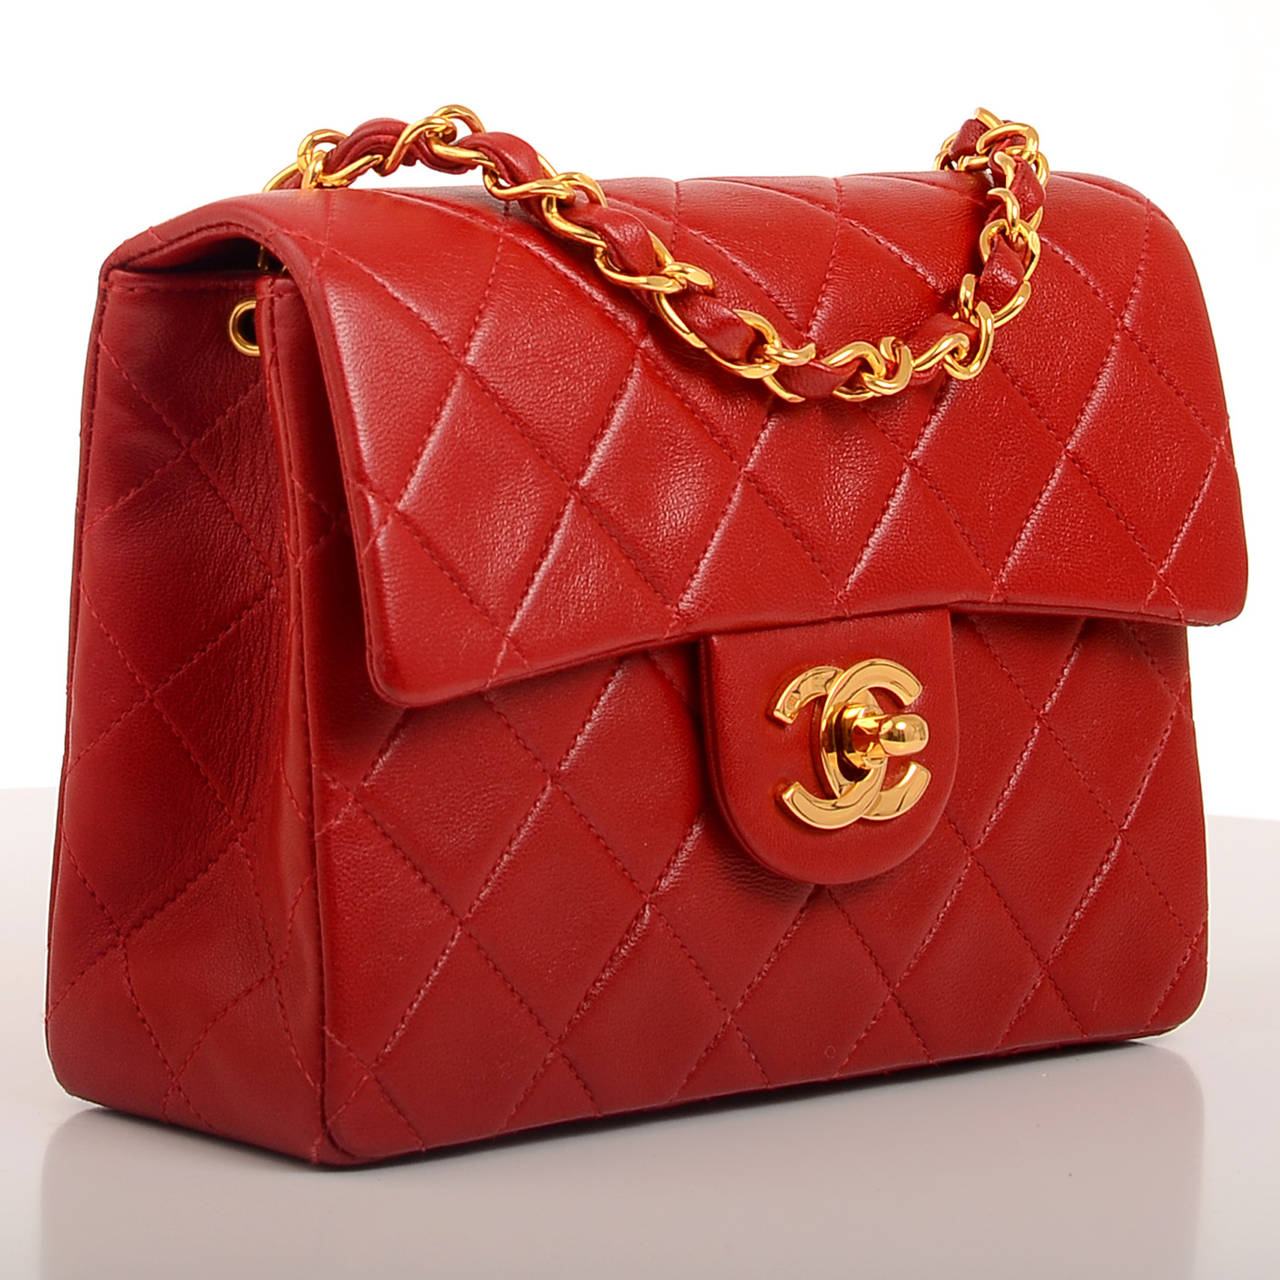 This vintage Mini Classic flap bag in lipstick red quilted lambskin leather is a youthful and compact version of the iconic Chanel Classic bag. Worn on the shoulder or across the body, it leaves the hands free and is the perfect bag for carrying the